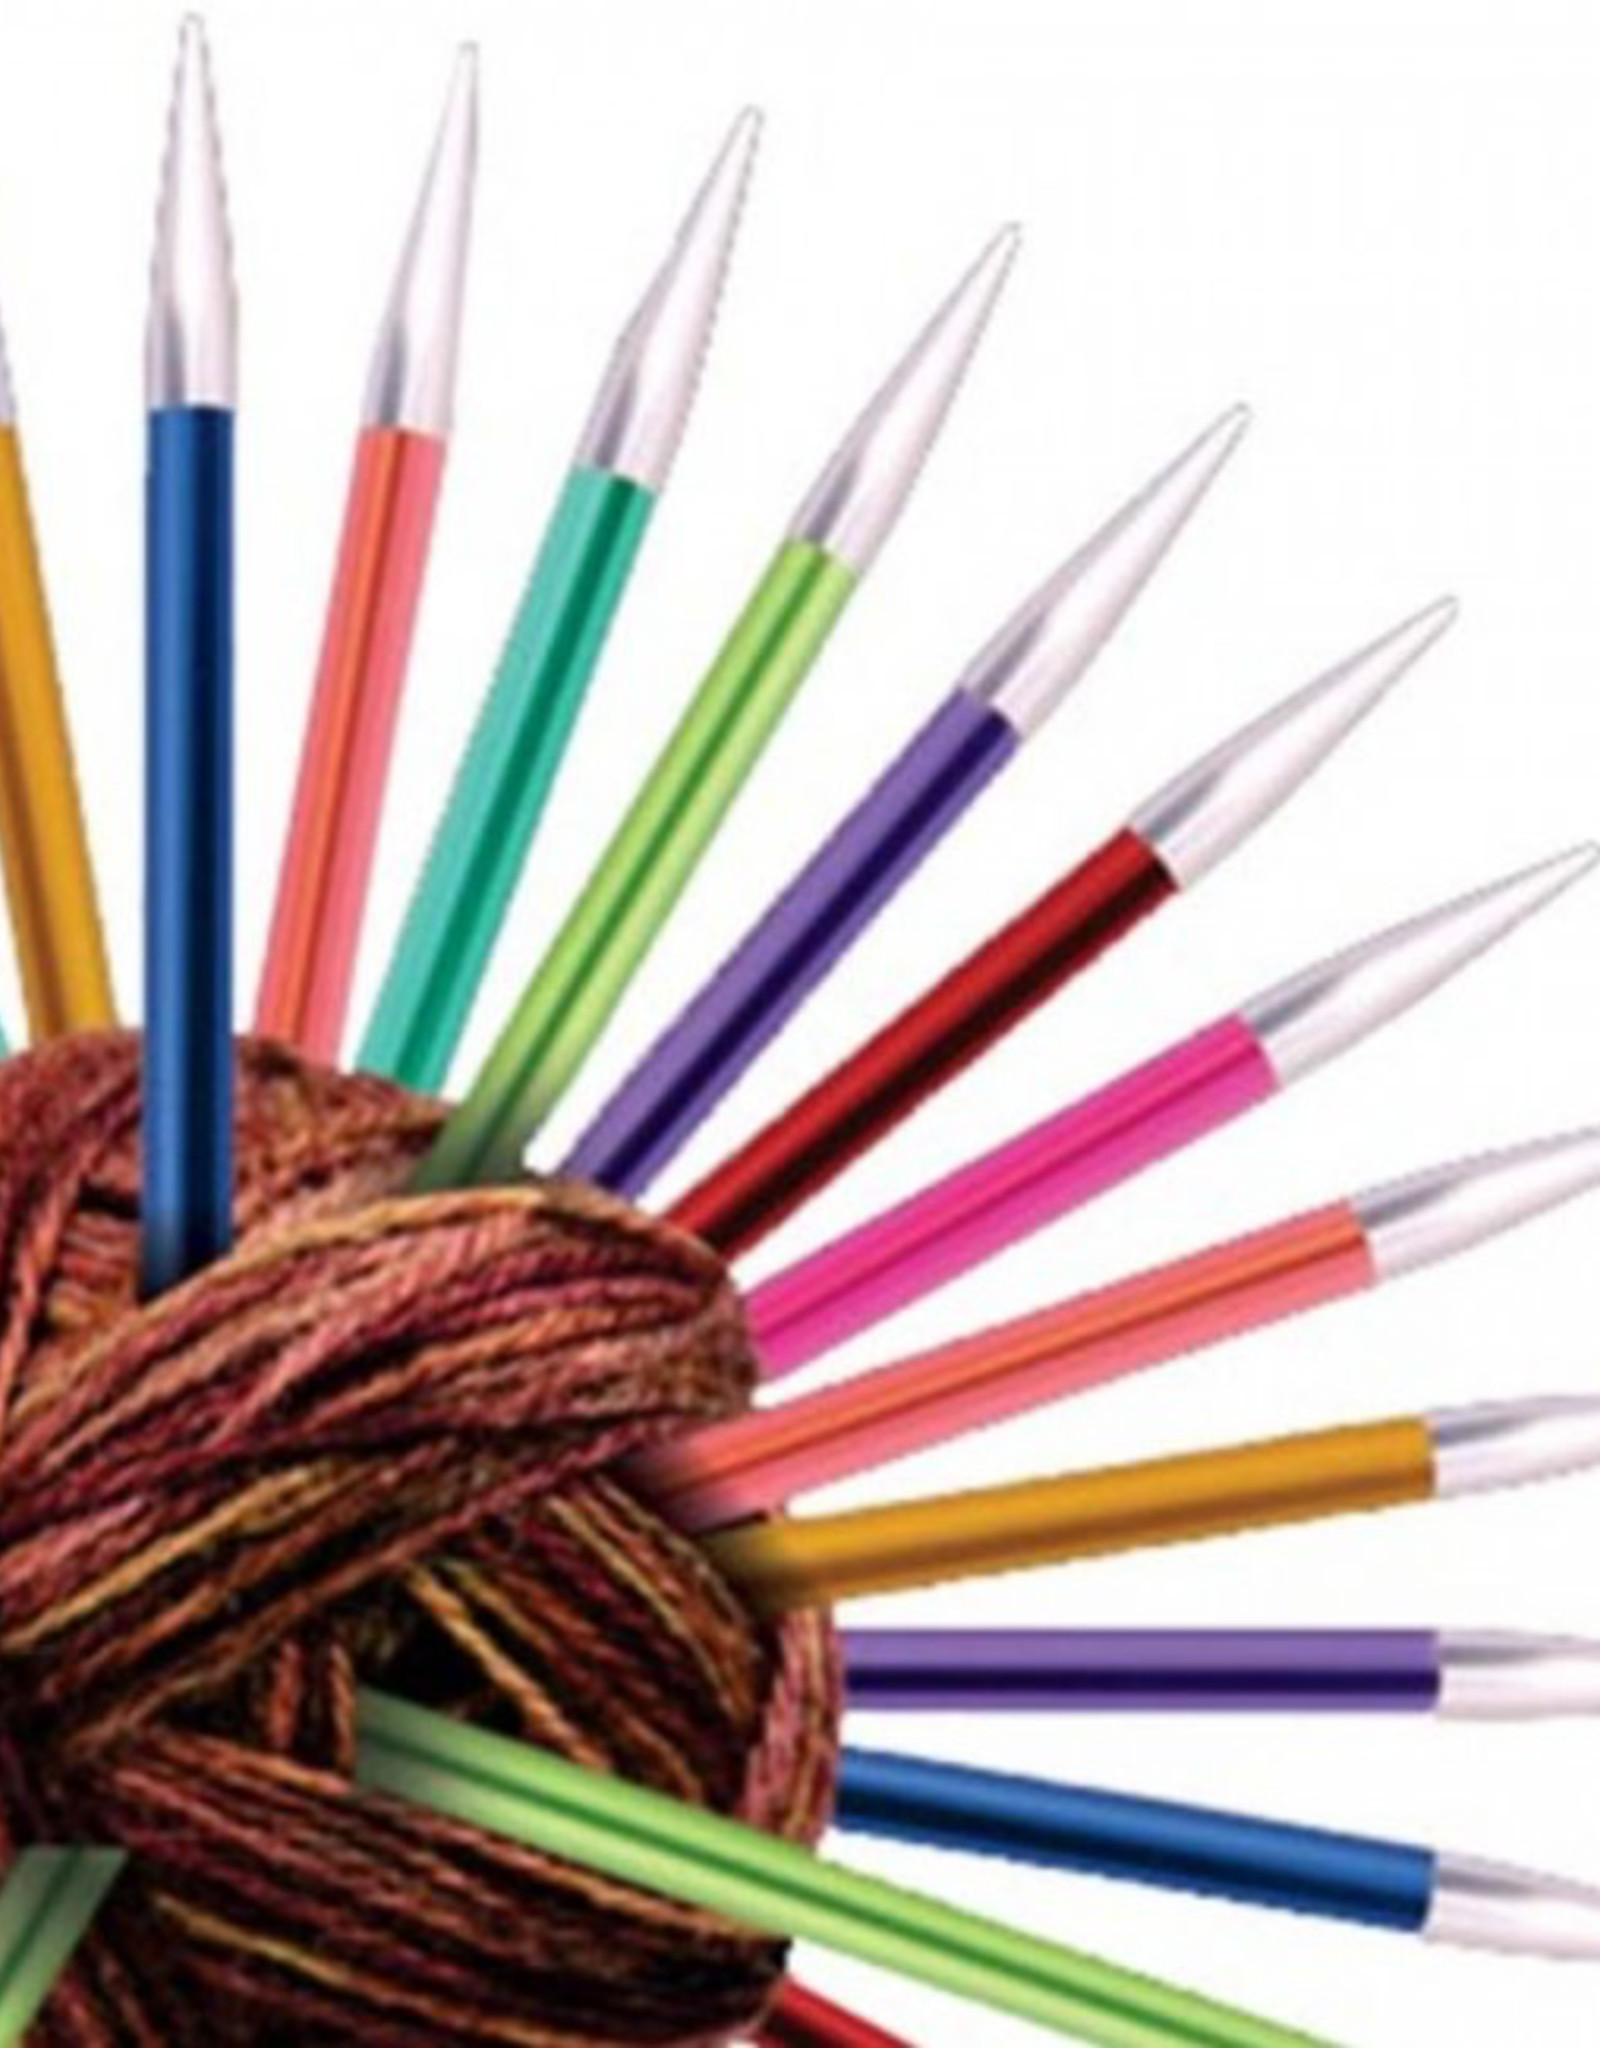 Knitter's Pride Zing Fixed Circular Needles by Knitter’s Pride